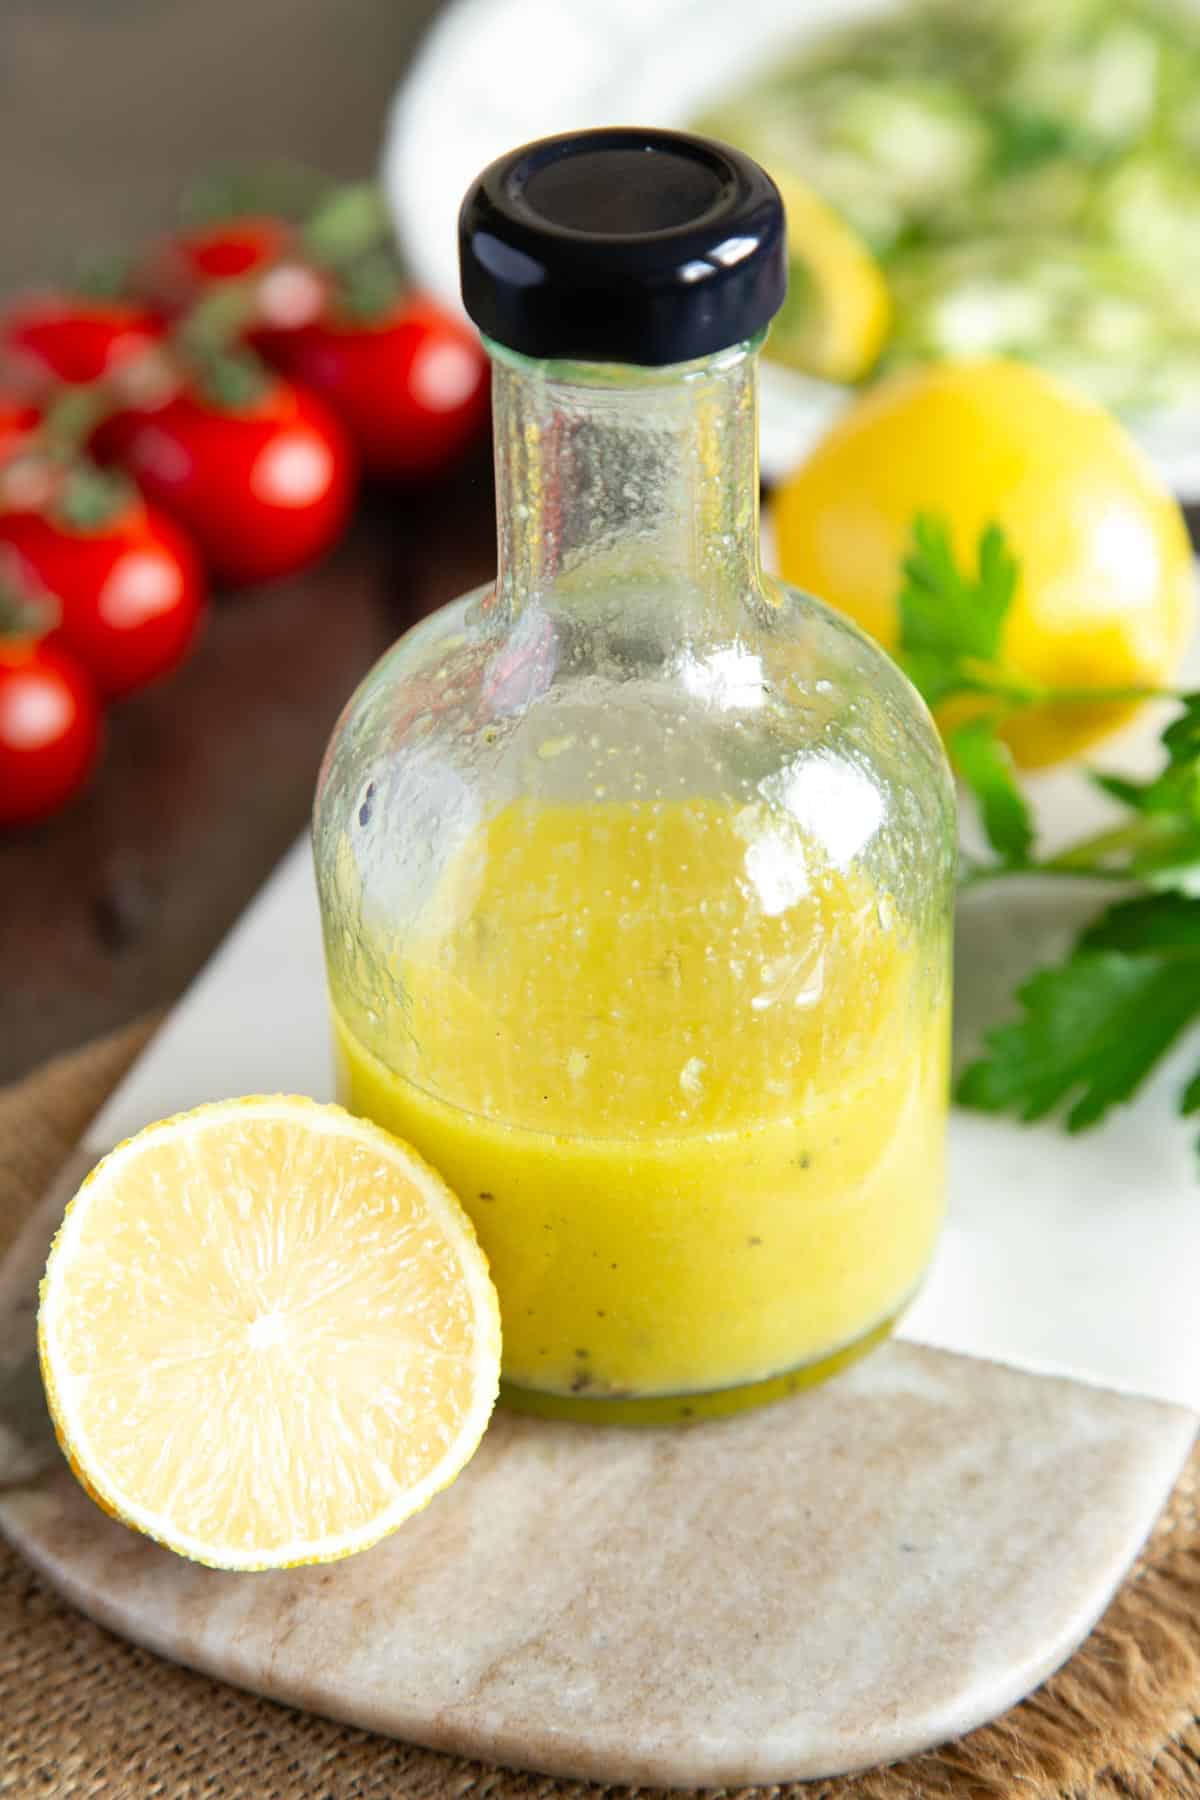 A small bottle of lemon dressing presented on a marble board with lemons and herbs.